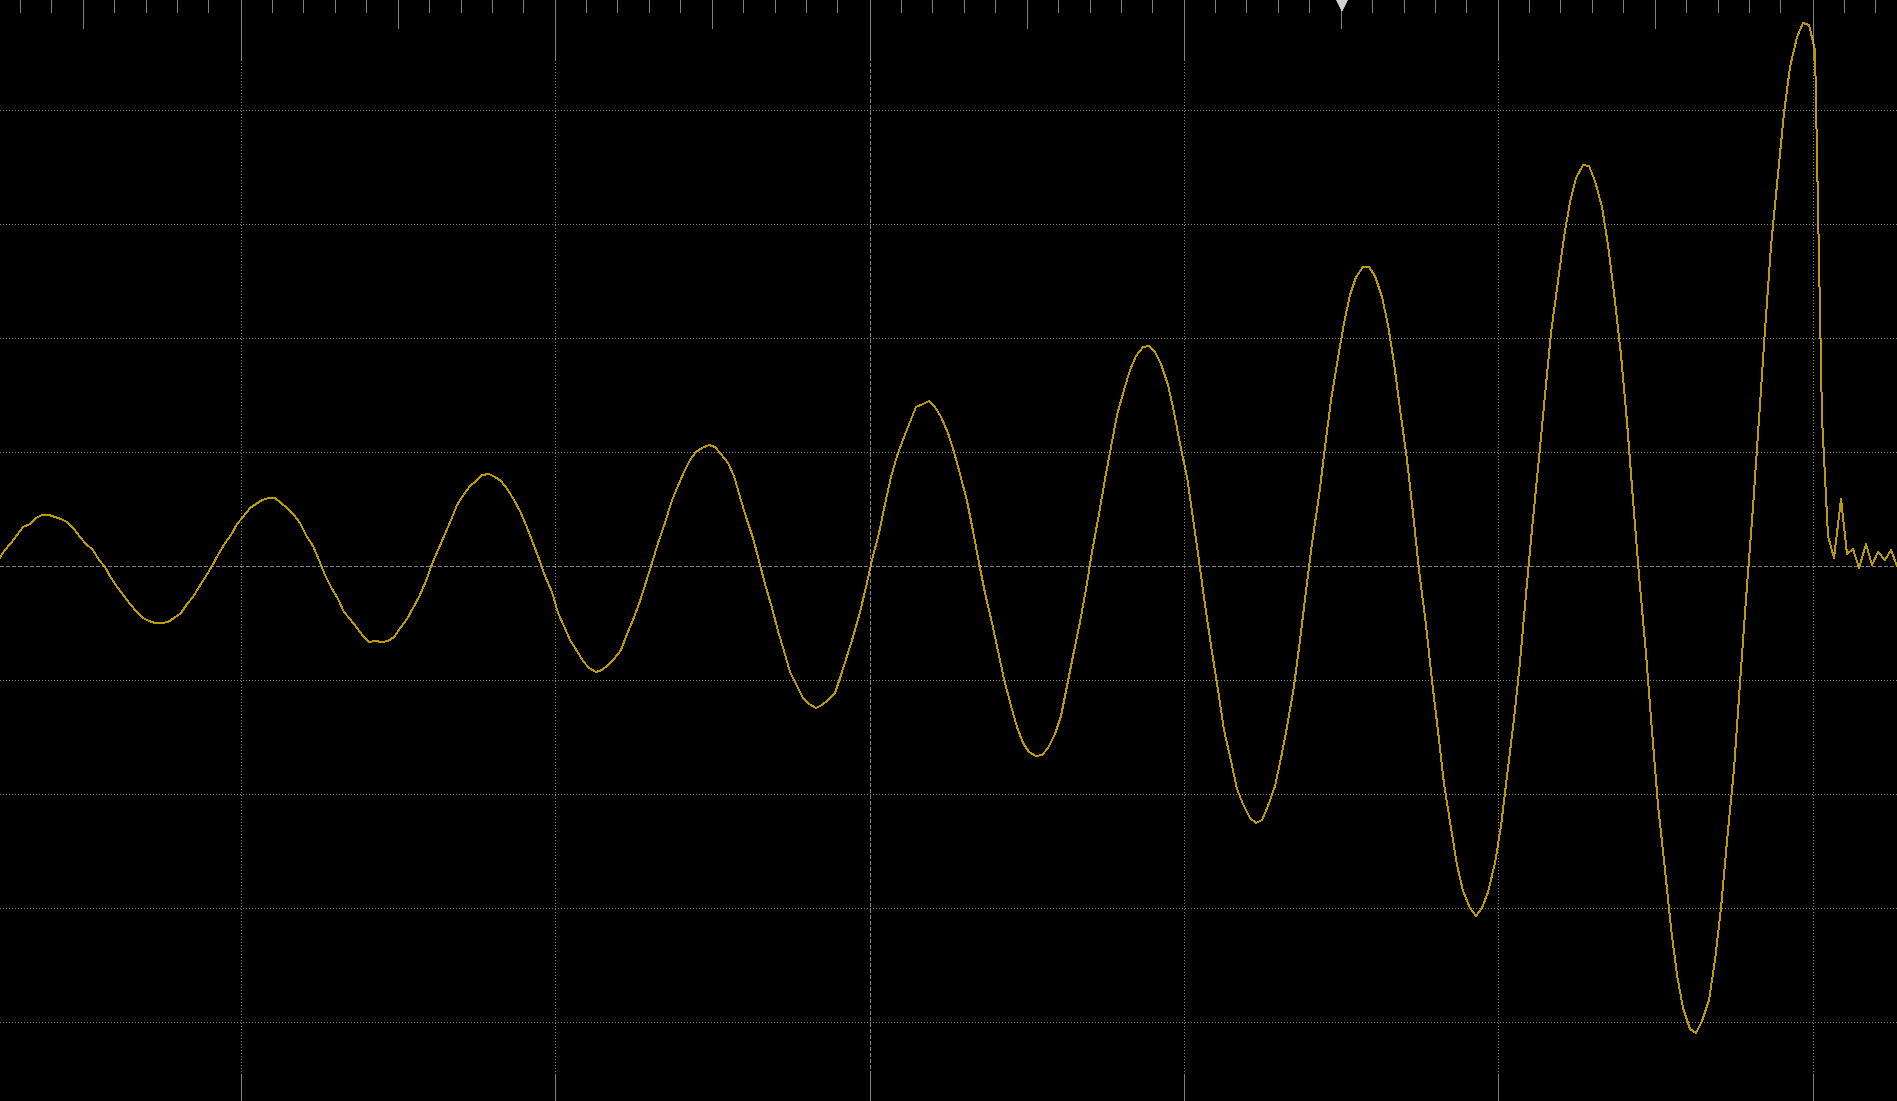 a view of a sine wave that gradually increases in amplitude, then resets back to 0V and starts over